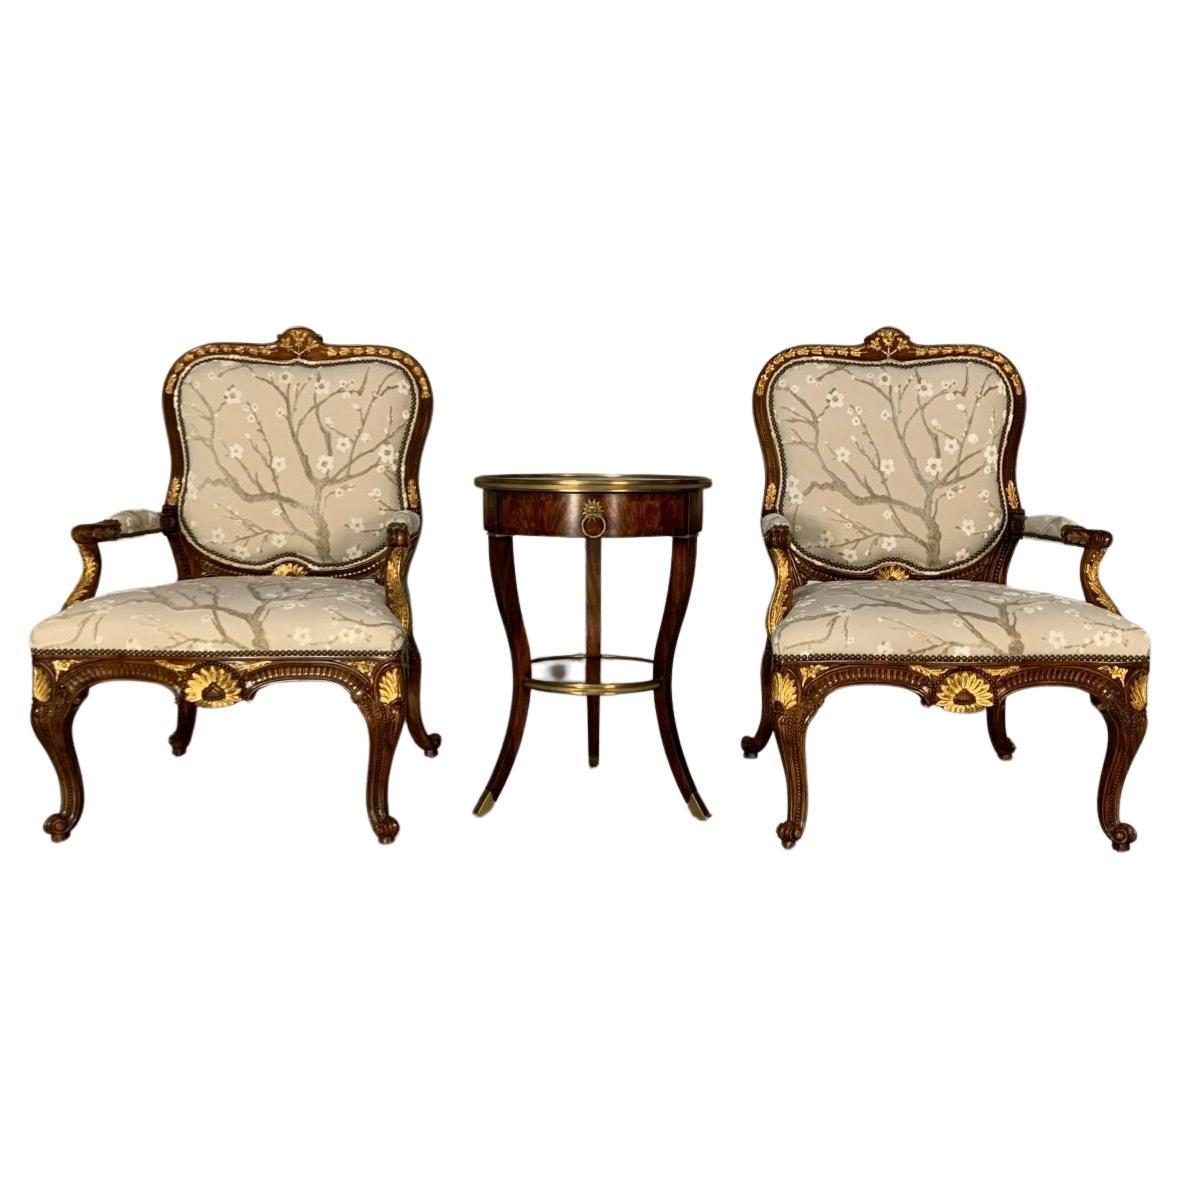 Pair of Theodore Alexander "Spencer House" Armchairs & Table